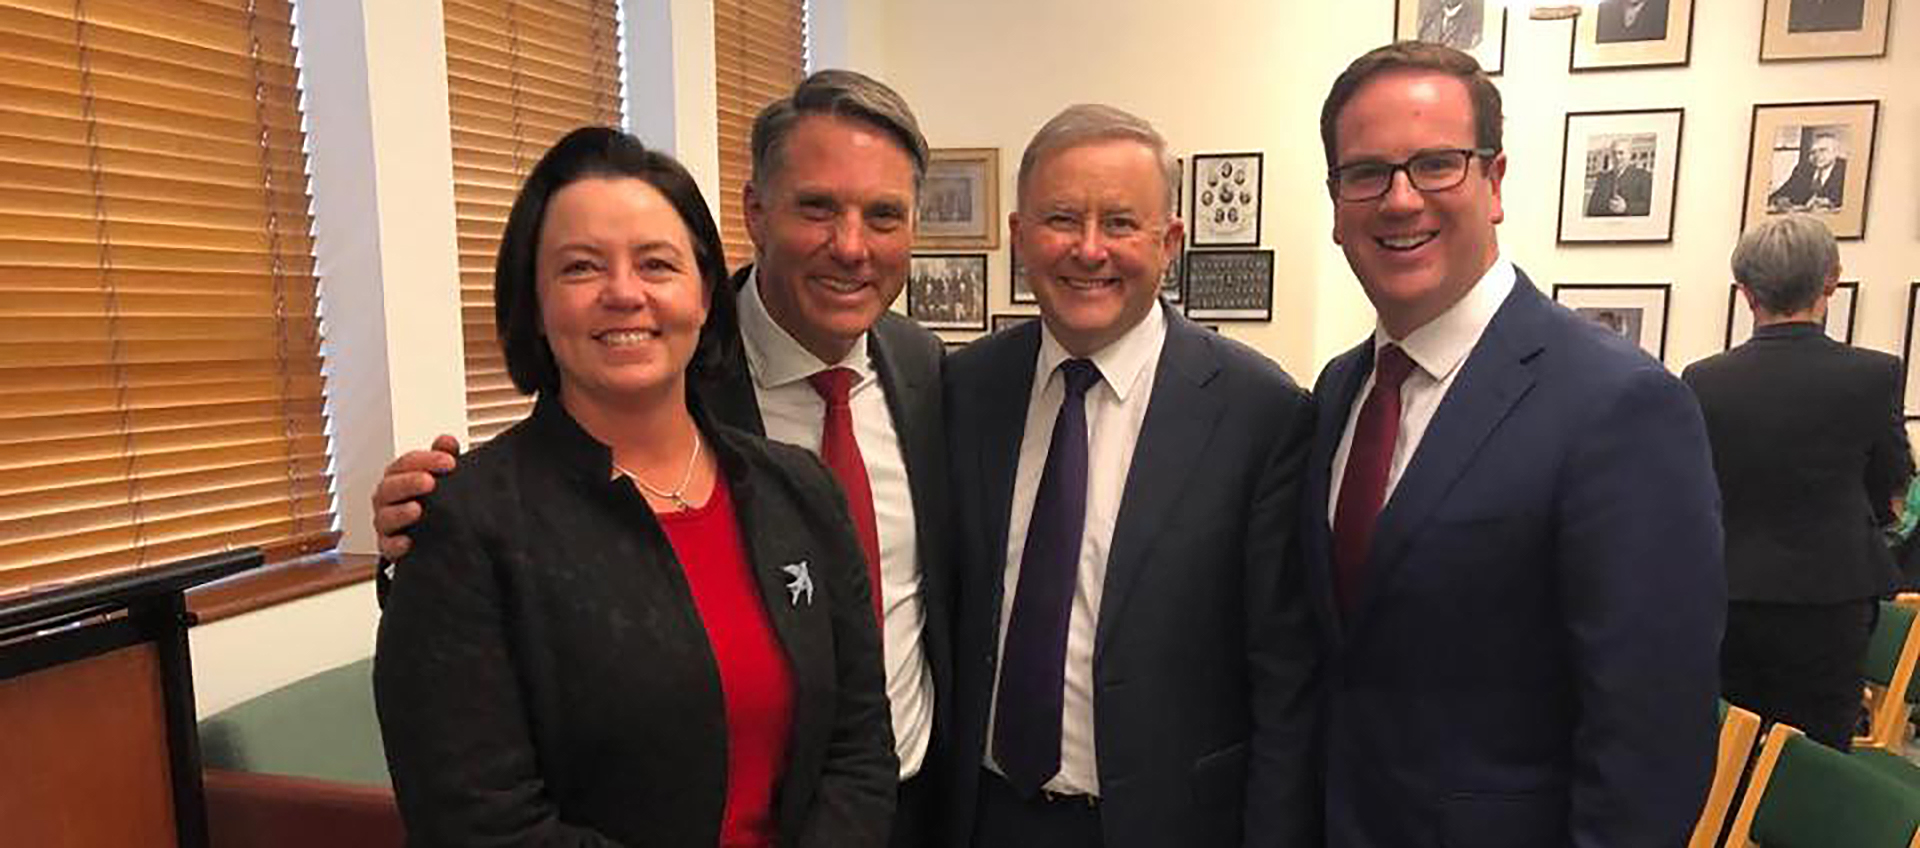 Labor's new shadow ministry has a unique WA flavour, including WA resources minister Matt Keogh.